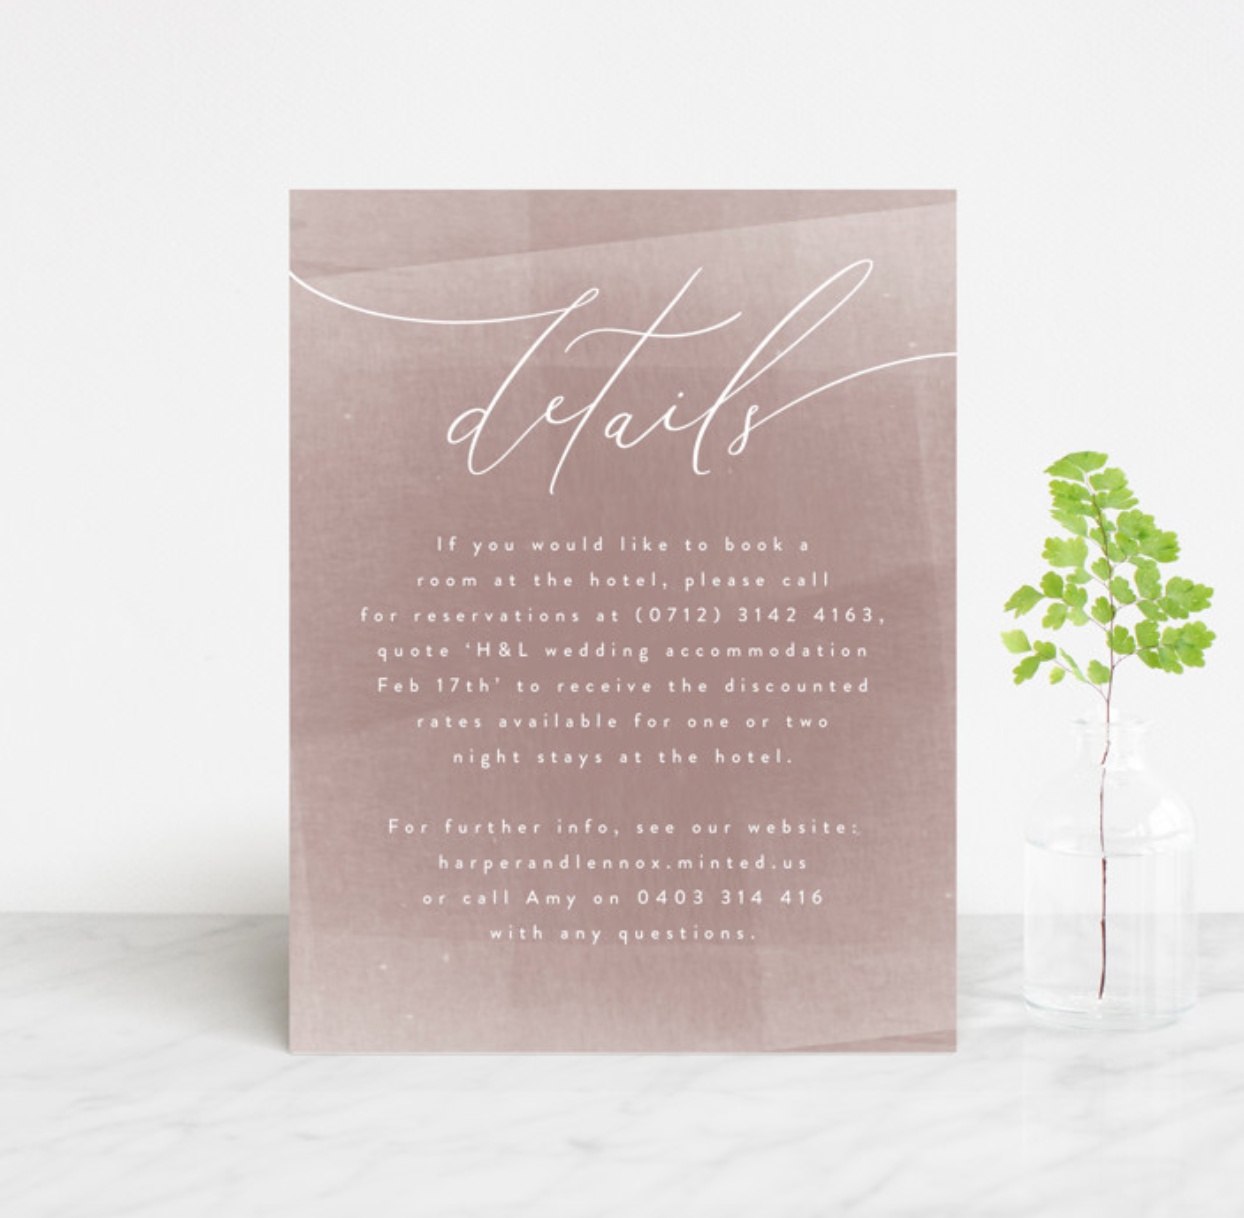 Simple wedding invitation detail card from Minted